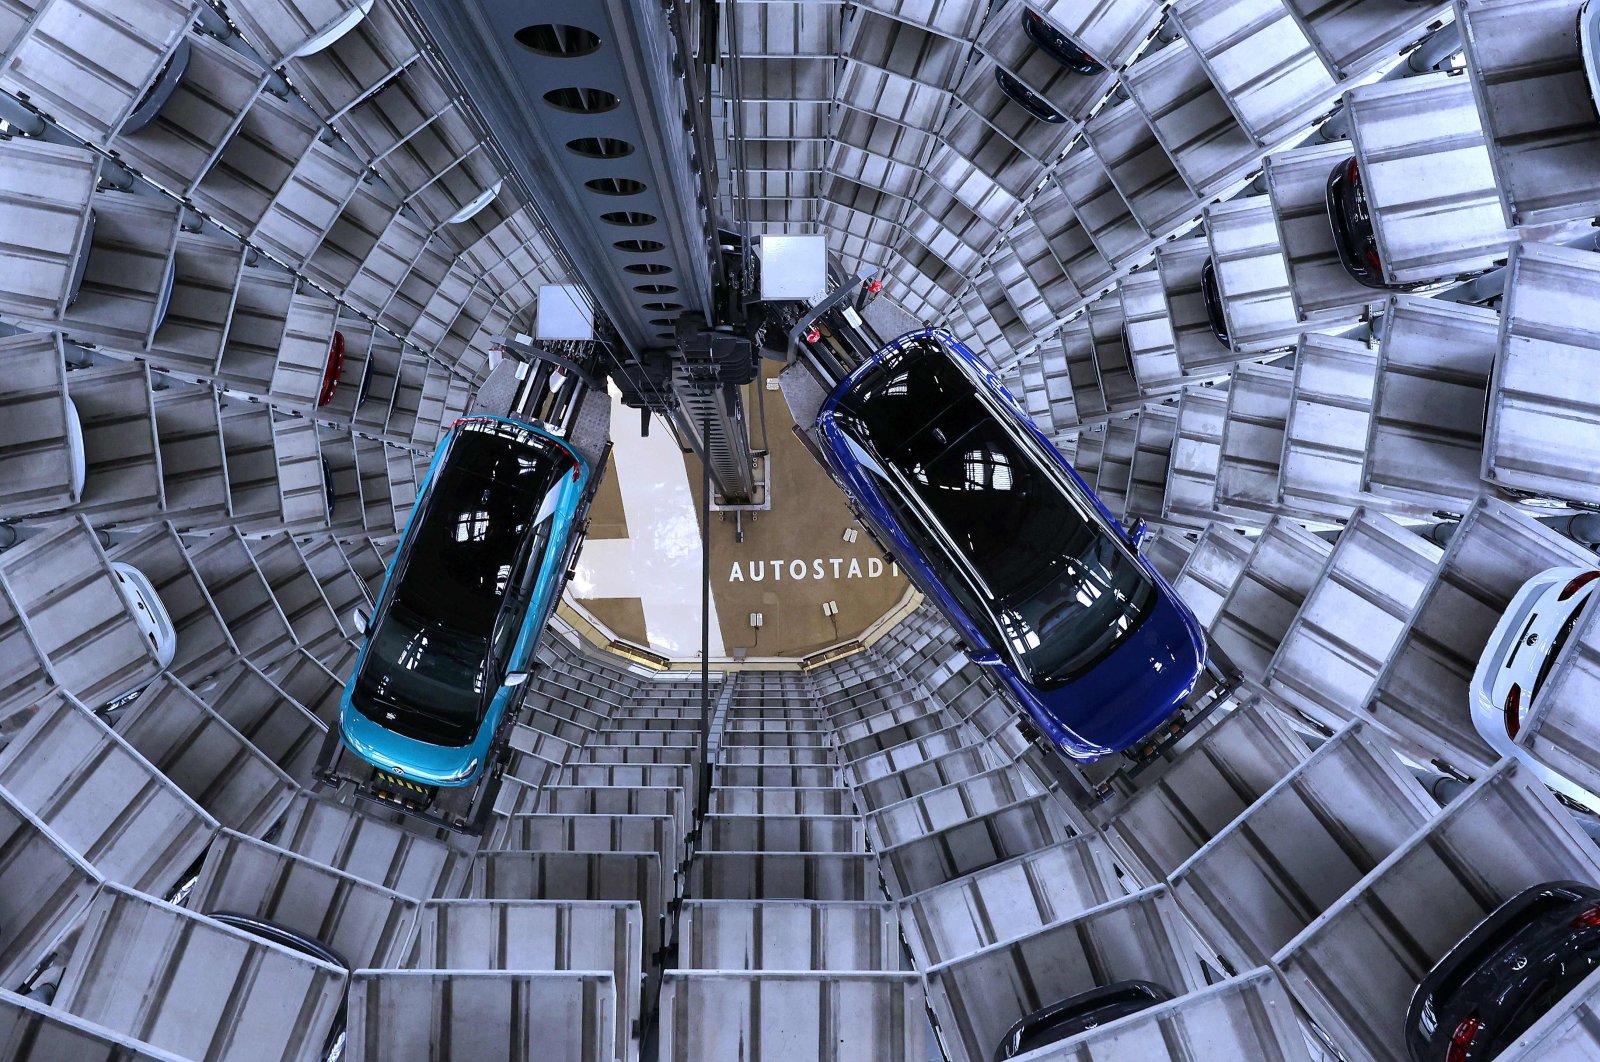 New Volkswagen (VW) ID.4 (right) and ID.3 (left) electric cars are presented at the storage facility auto tower of German carmaker Volkswagen in Wolfsburg, northern Germany, Oct. 26, 2020. (AFP Photo)